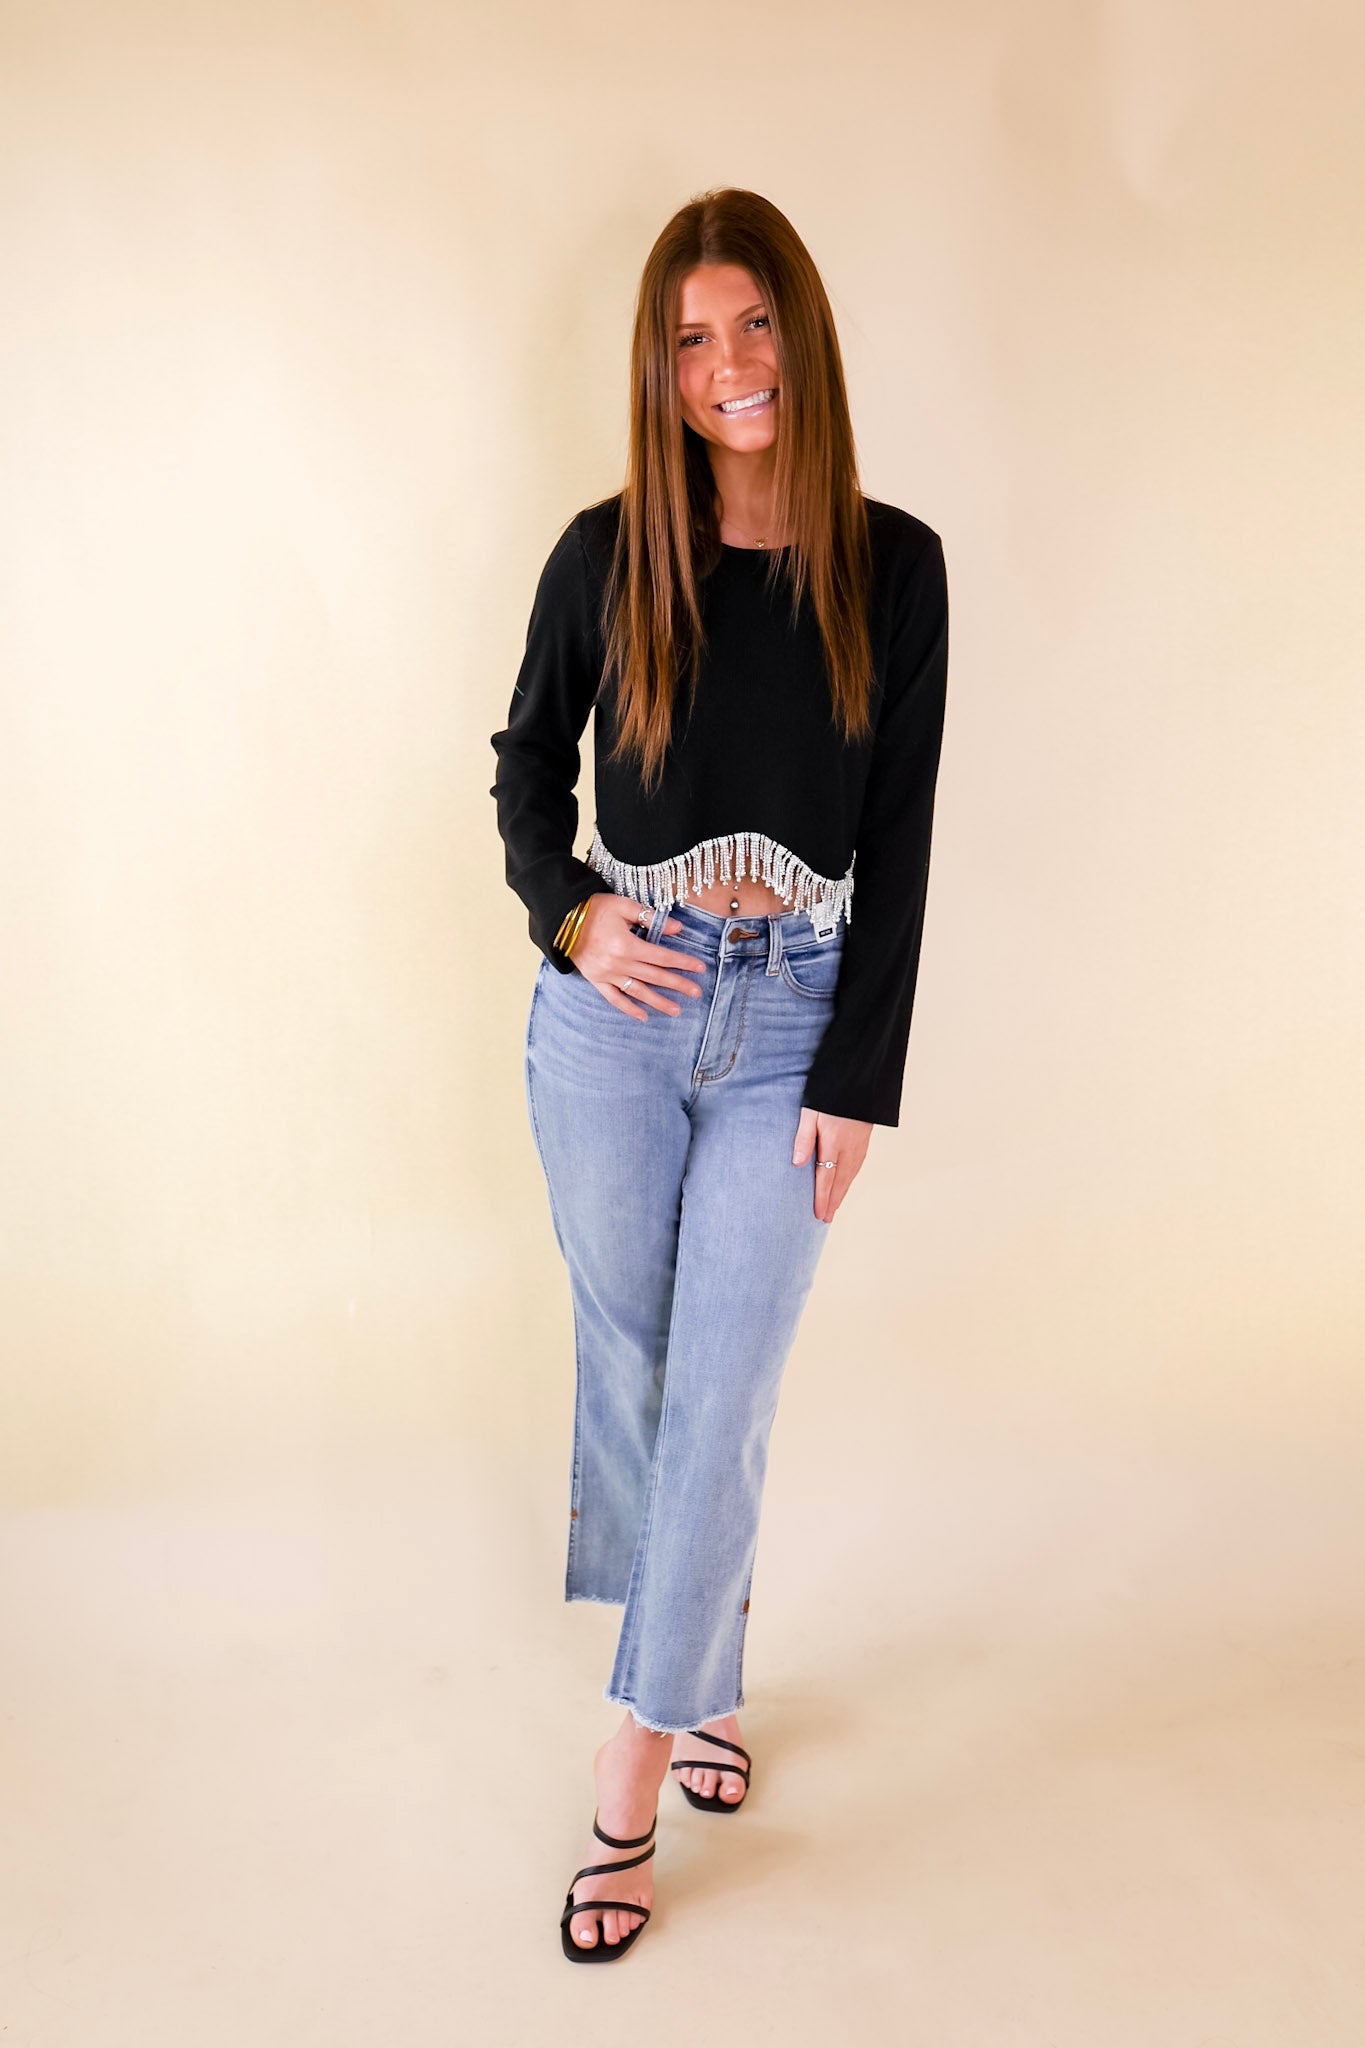 Signature Look Long Sleeve Crop Top with Crystal Fringe Trim in Black - Giddy Up Glamour Boutique